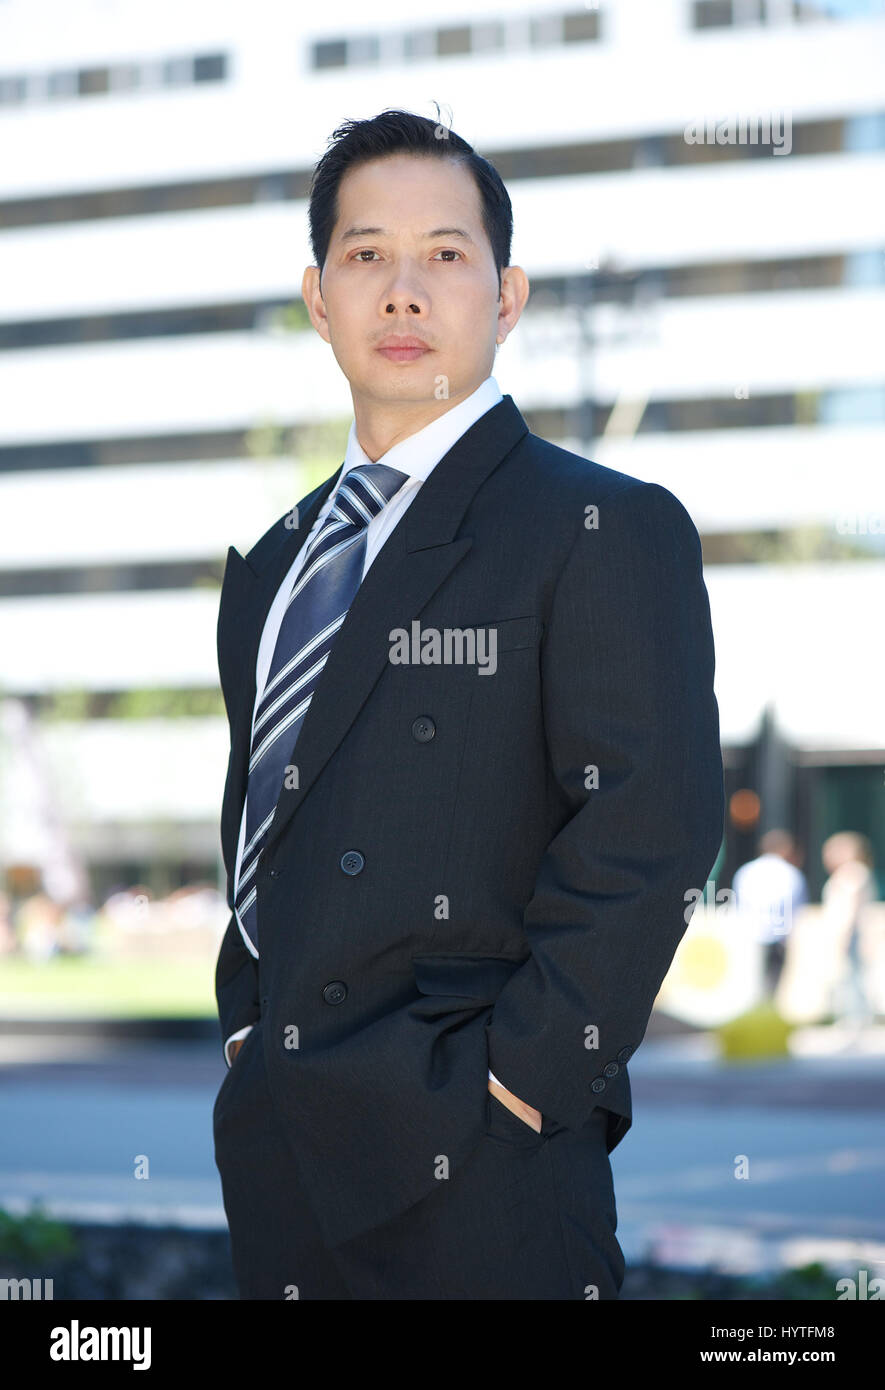 Formal portrait of an asian businessman standing outside Stock Photo